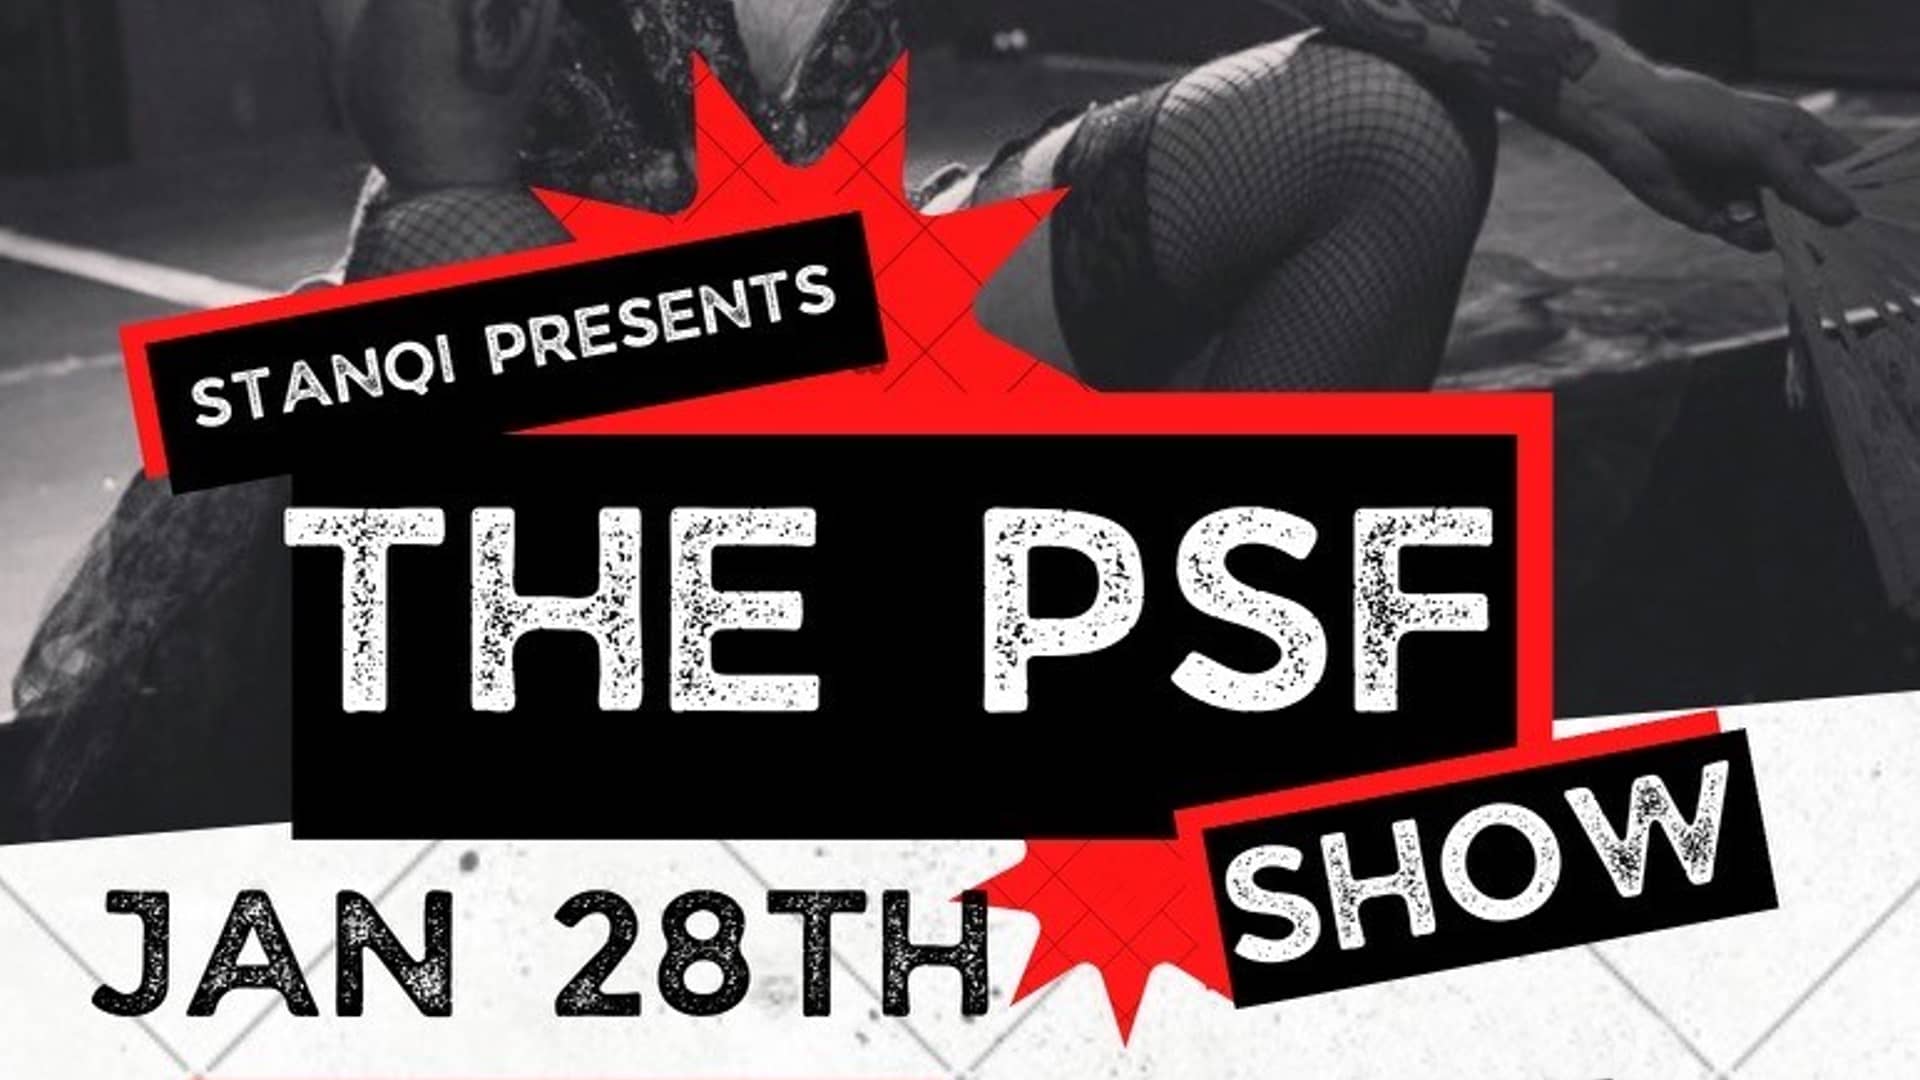 The PSF Show